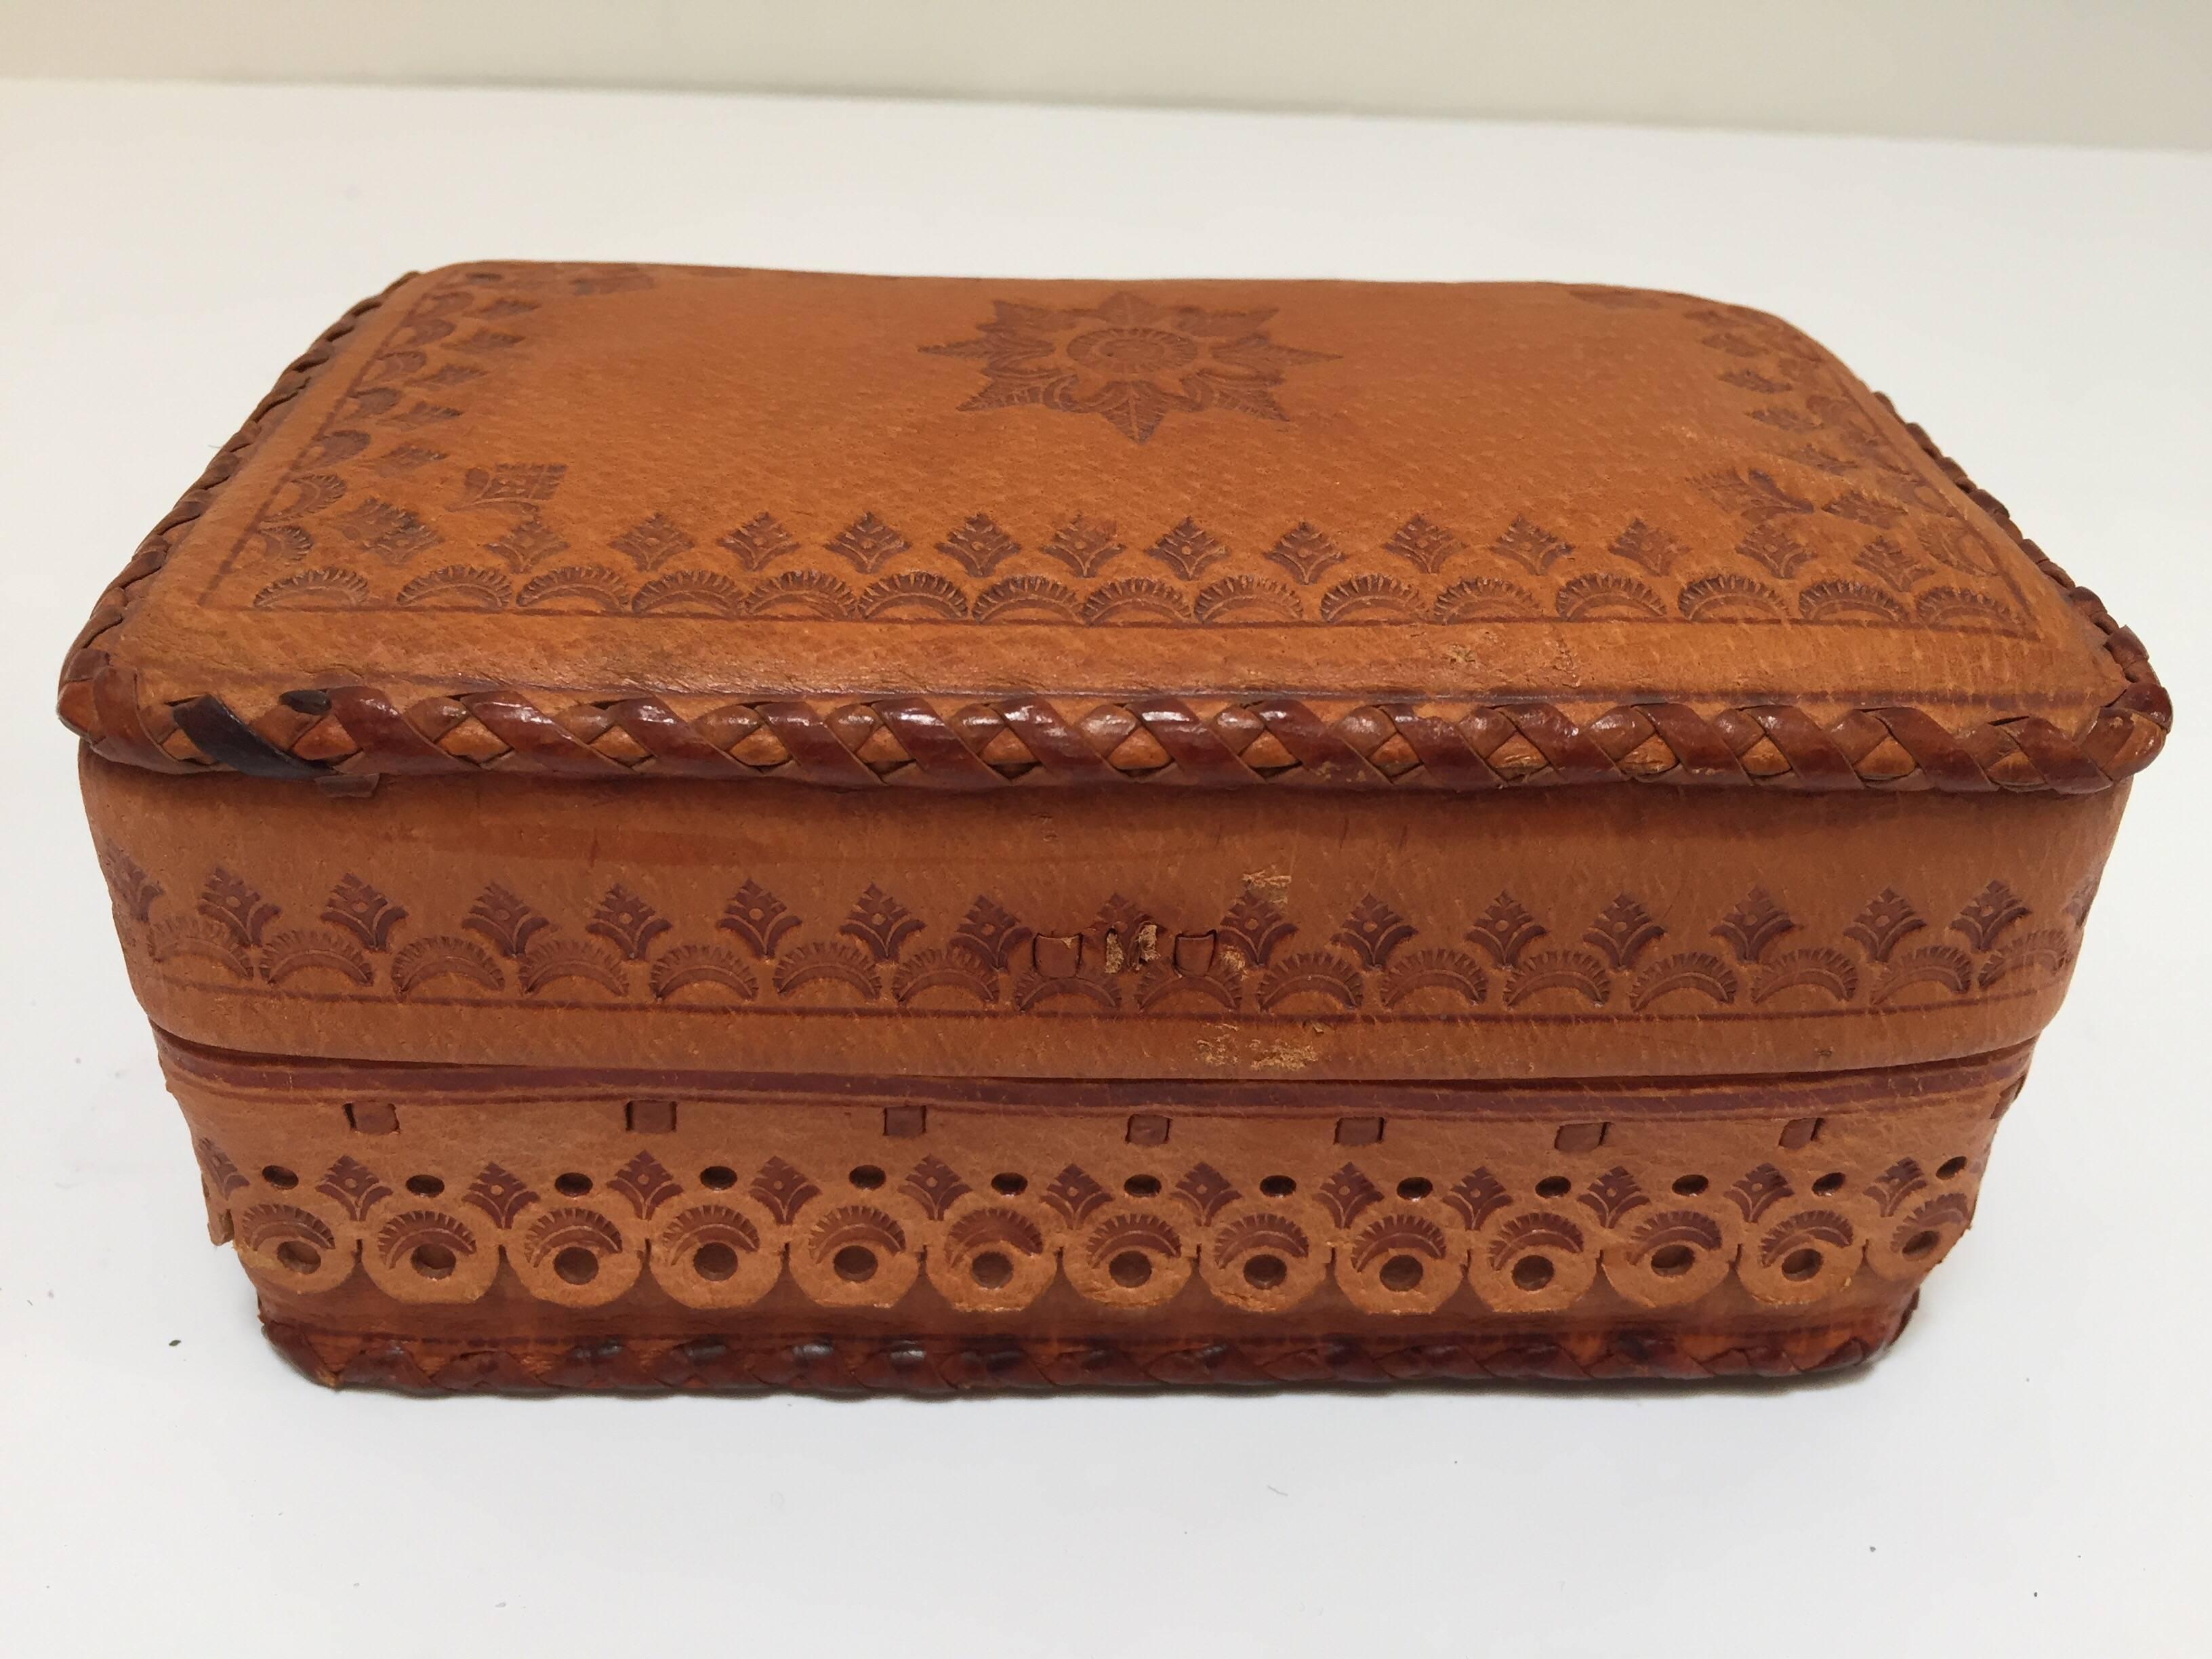 Hand-Crafted Leather Vintage Brown Box Hand Tooled in Morocco with Tribal African Designs